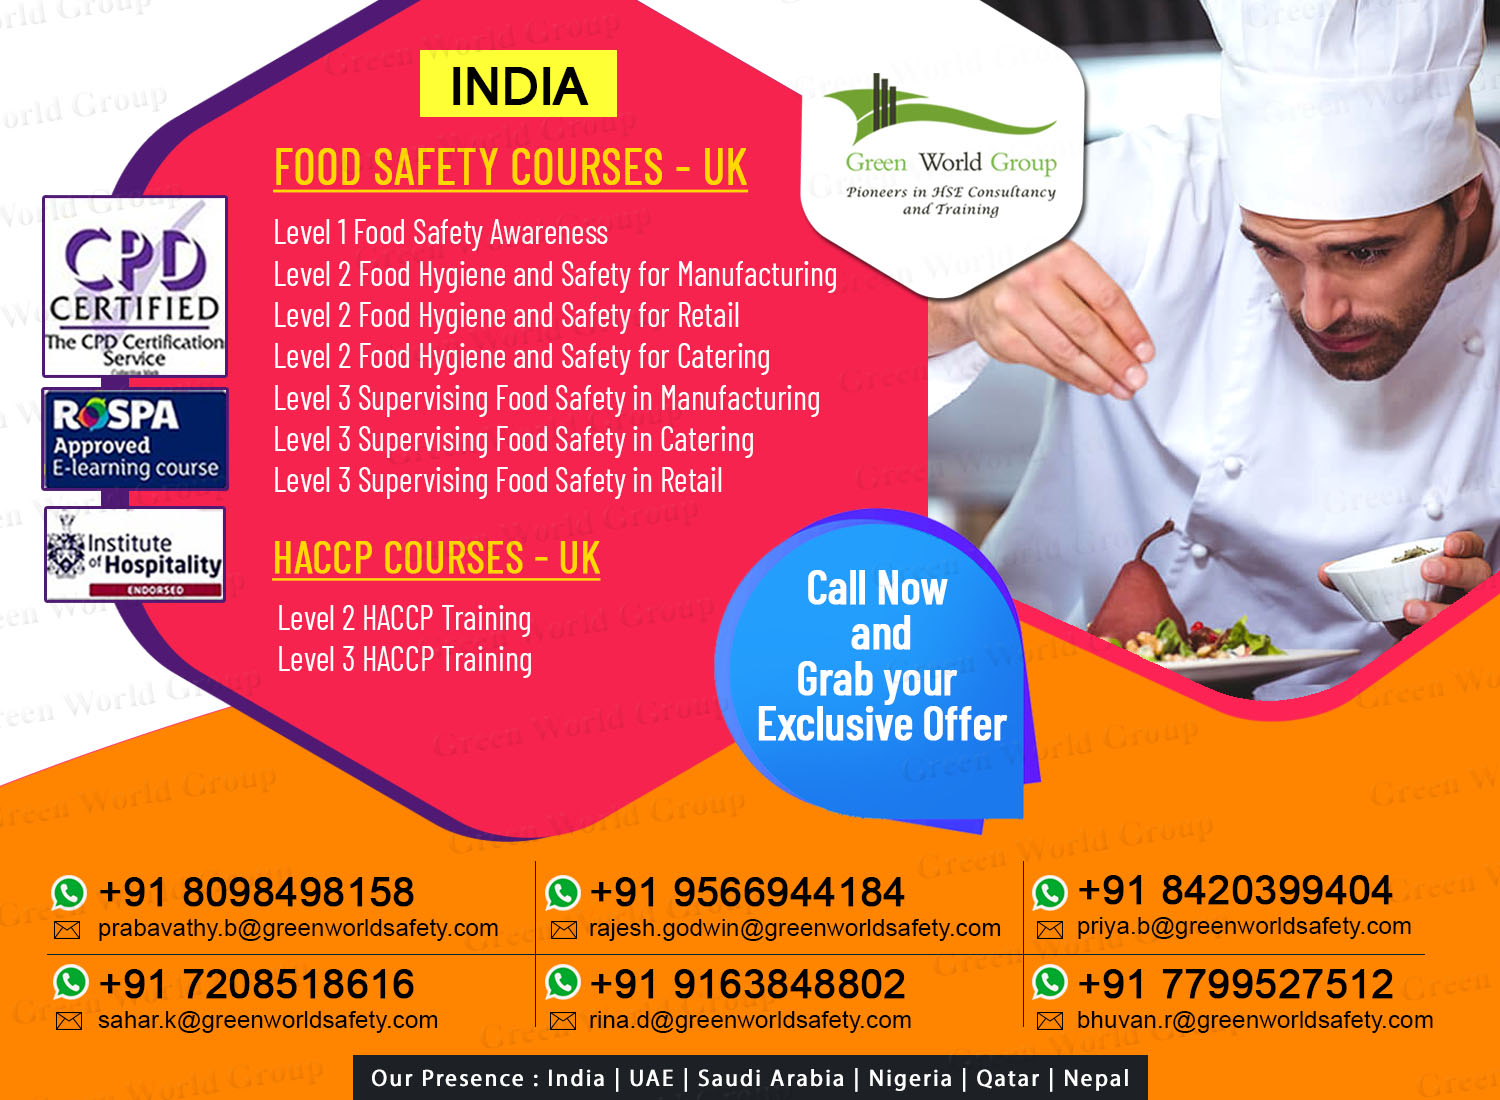 Food Safety Courses - UK